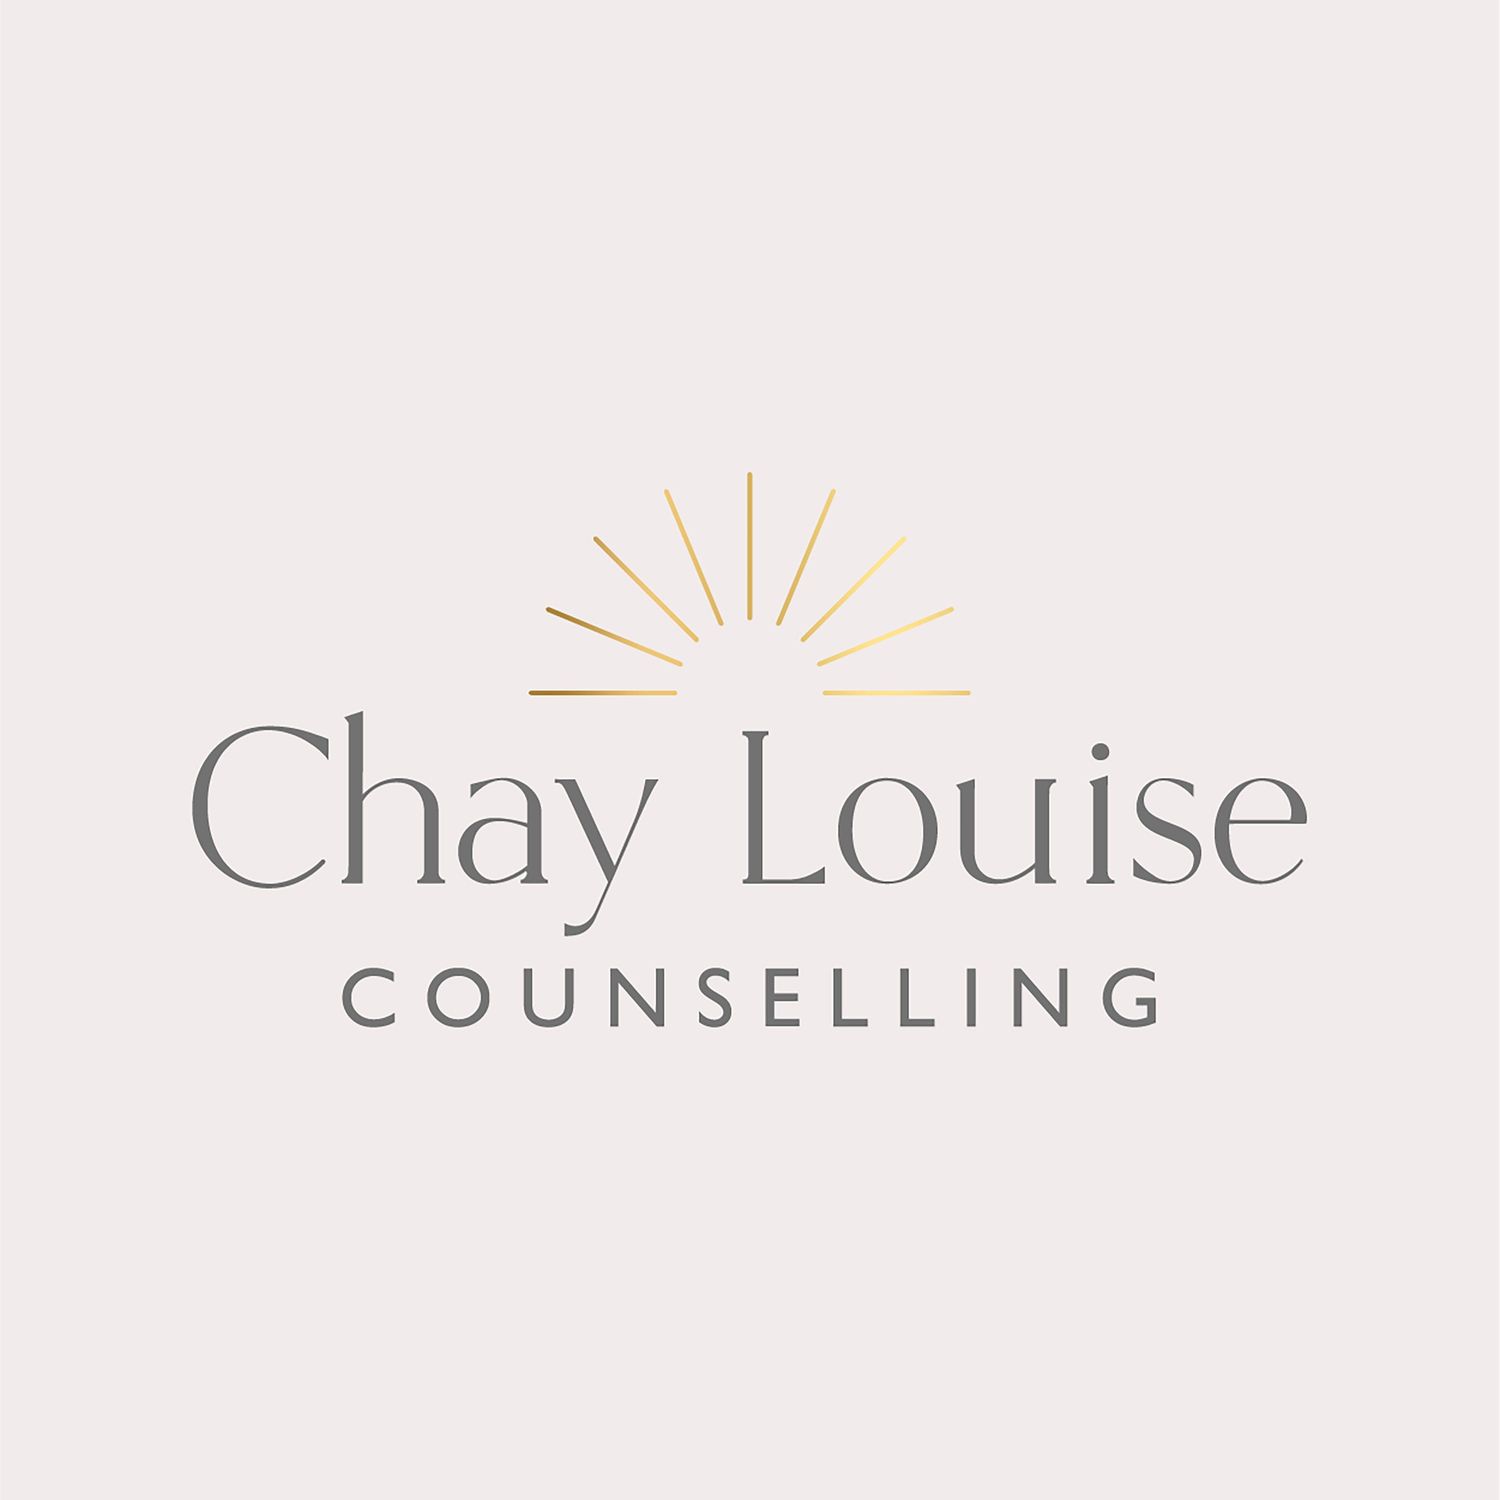 Gallery Photo of Chay Louise Counselling, Warm, Gentle, No judgement, Empathising, Genuine